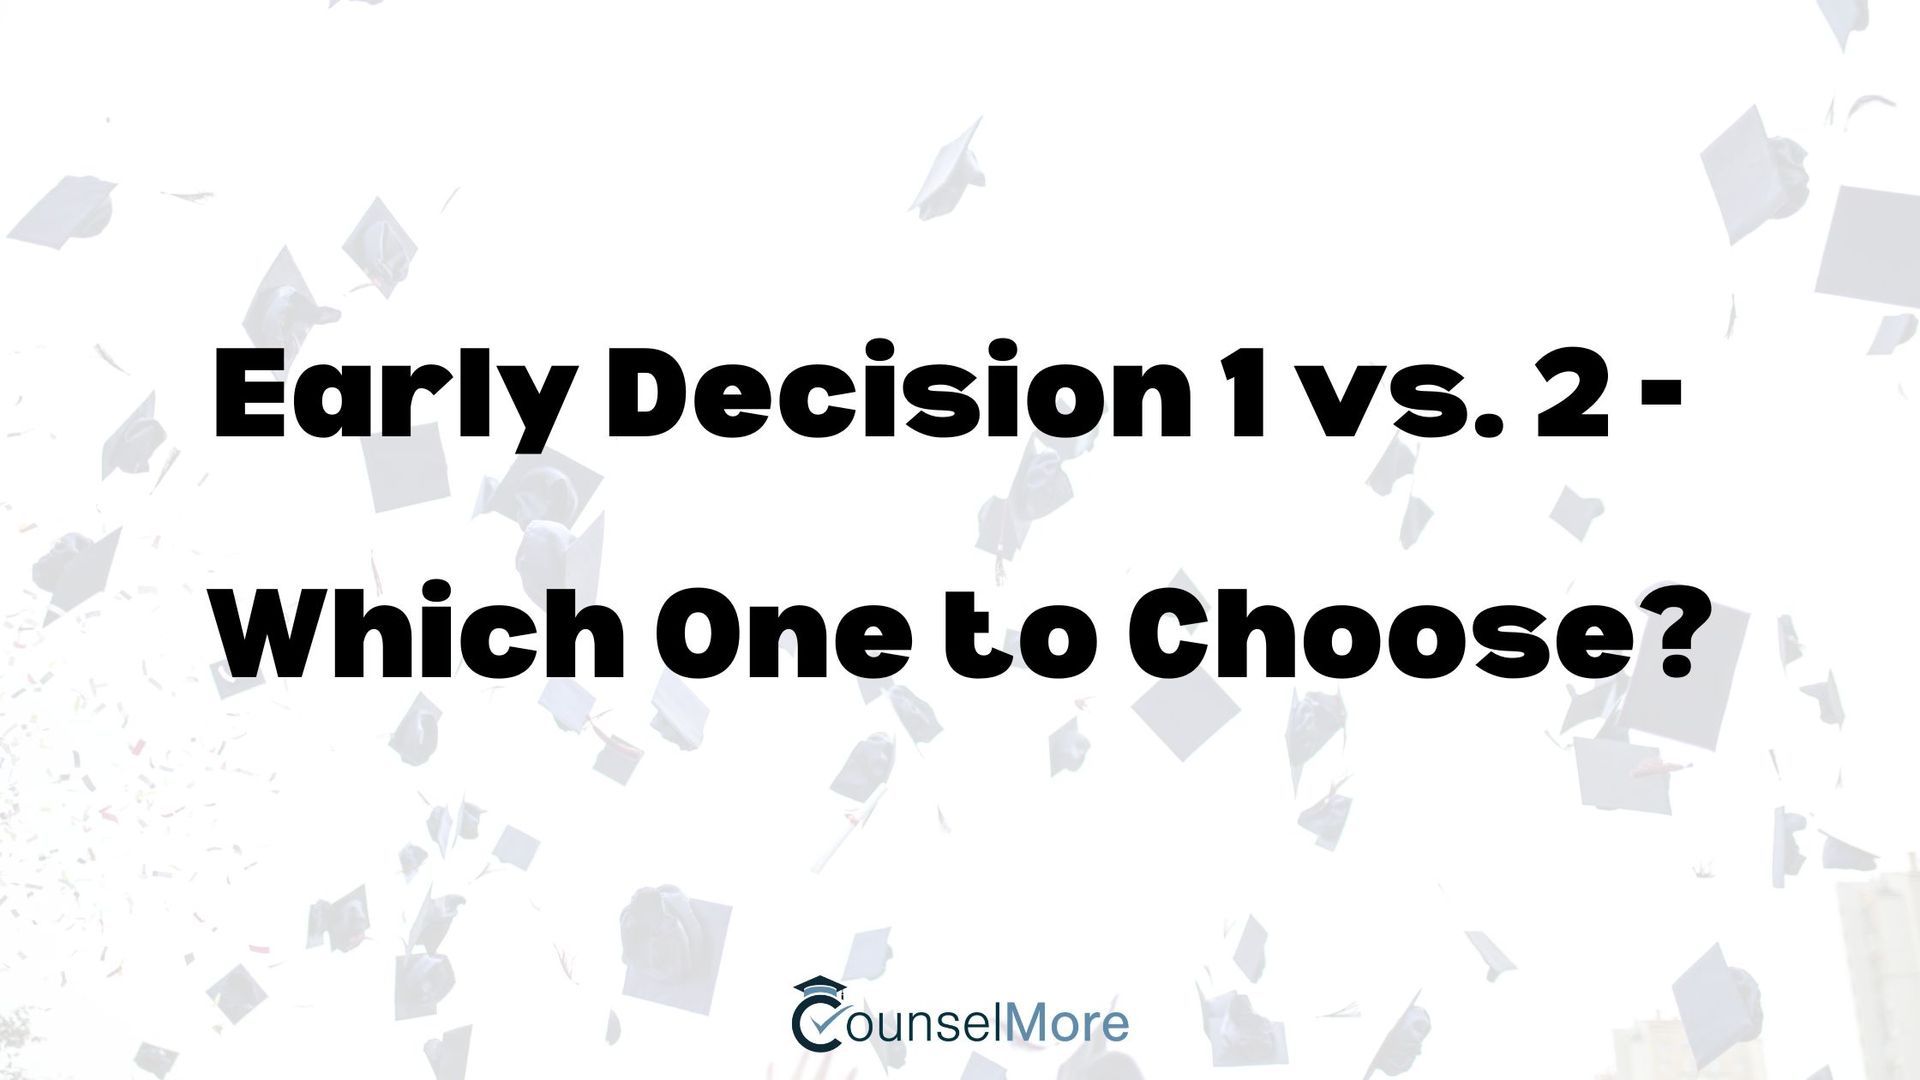 IEC banner that says Early Decision 1 vs. 2 - which one to choose? 